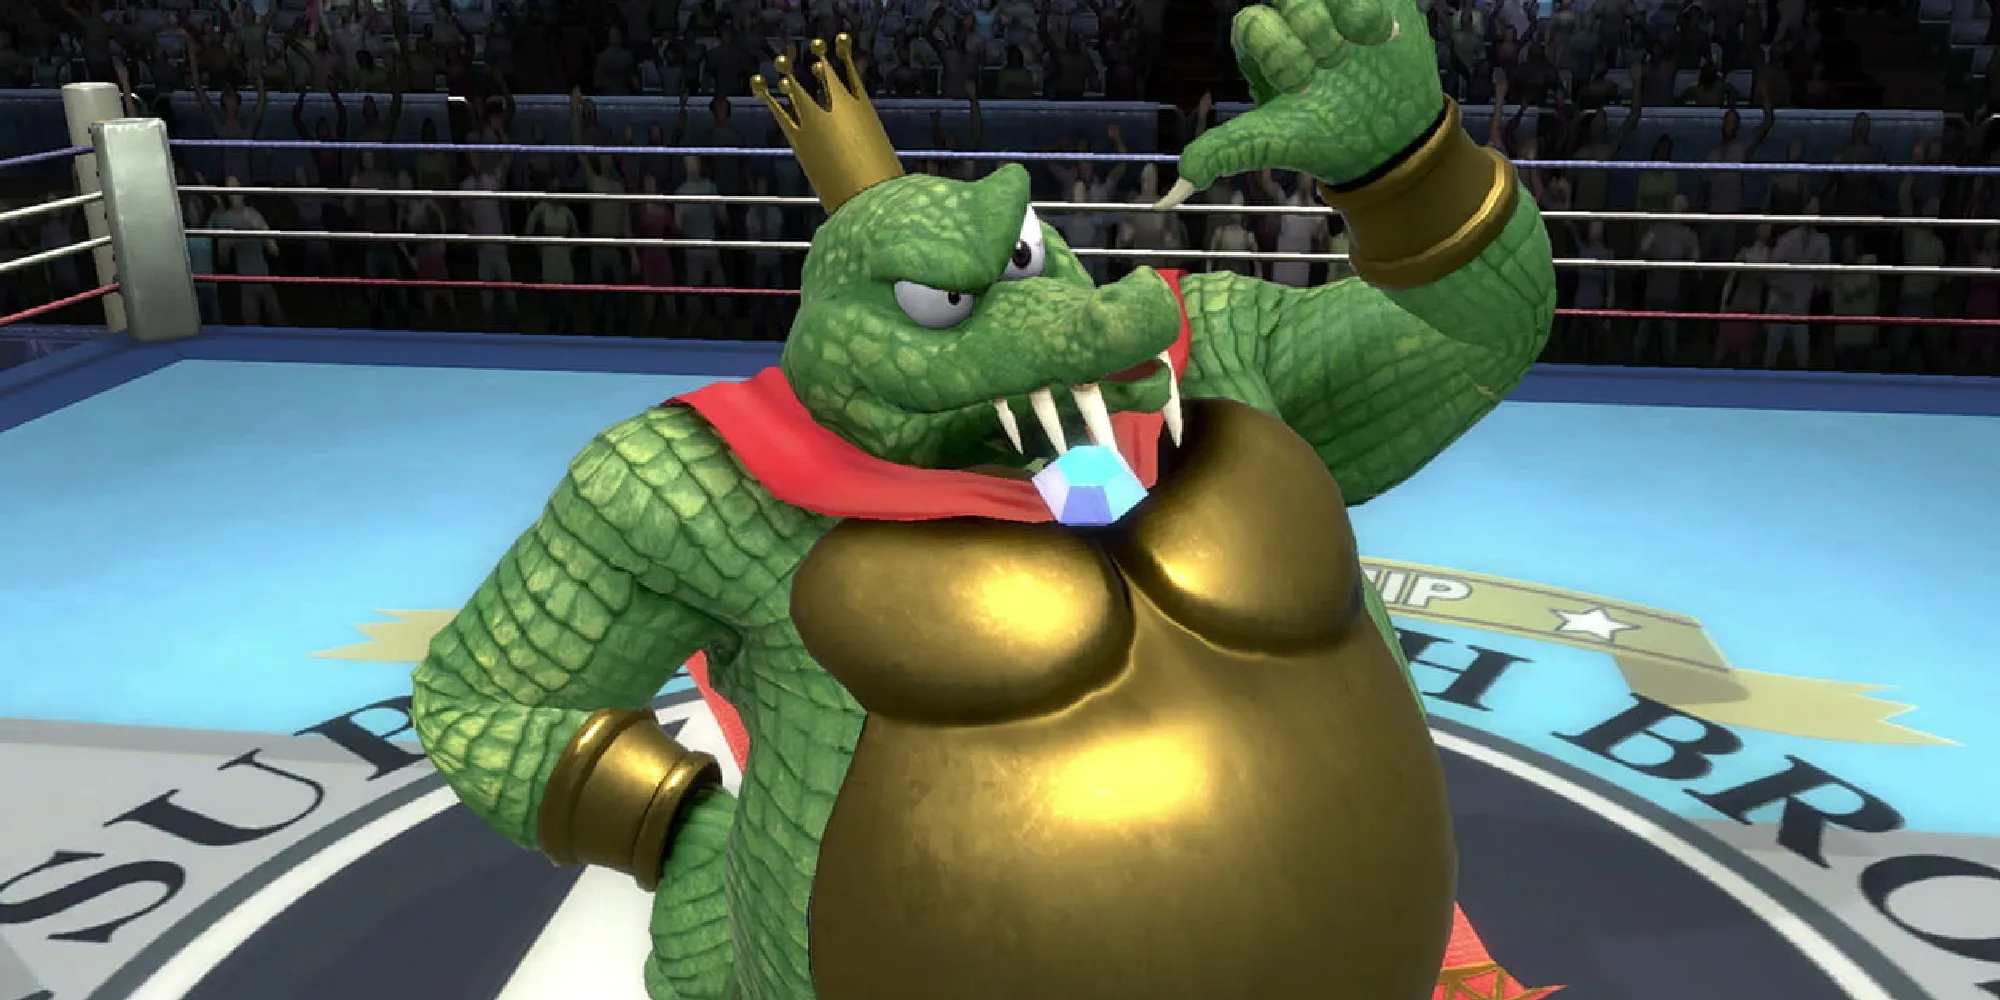 King K. Rool pointing in a wrestling ring